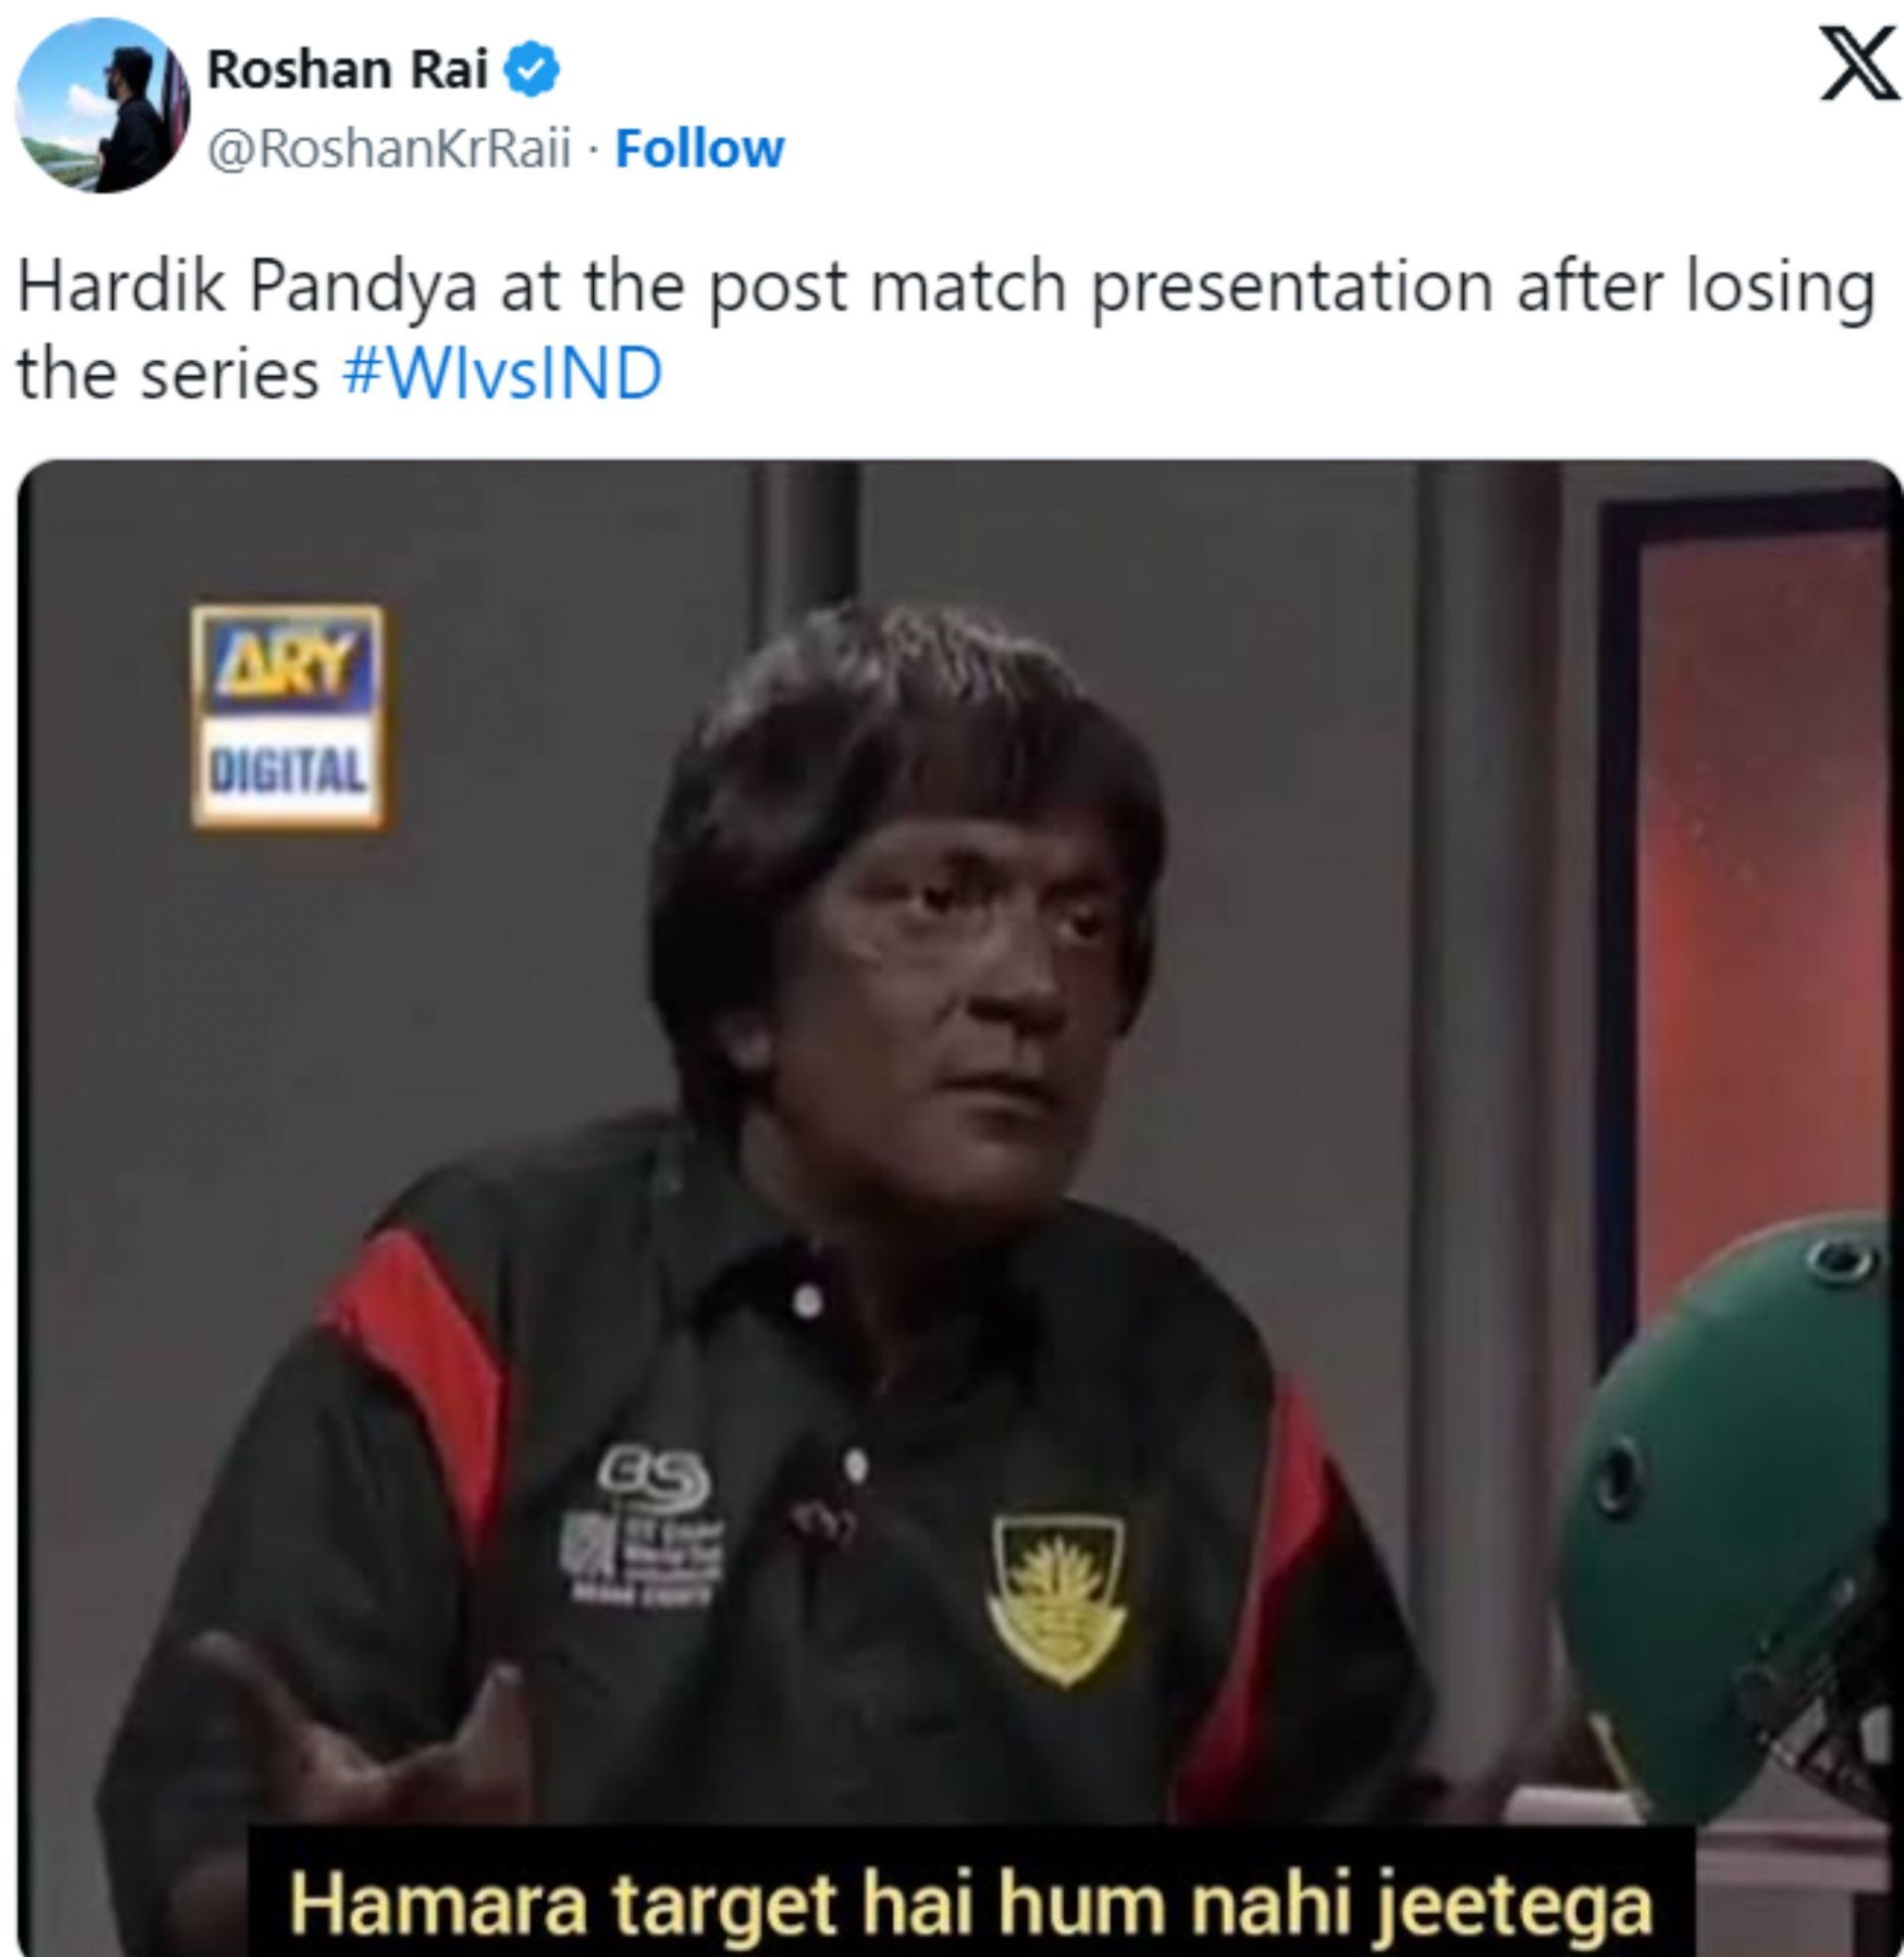 Meme shared by a fan after watching the 5th T20I India vs West Indies.